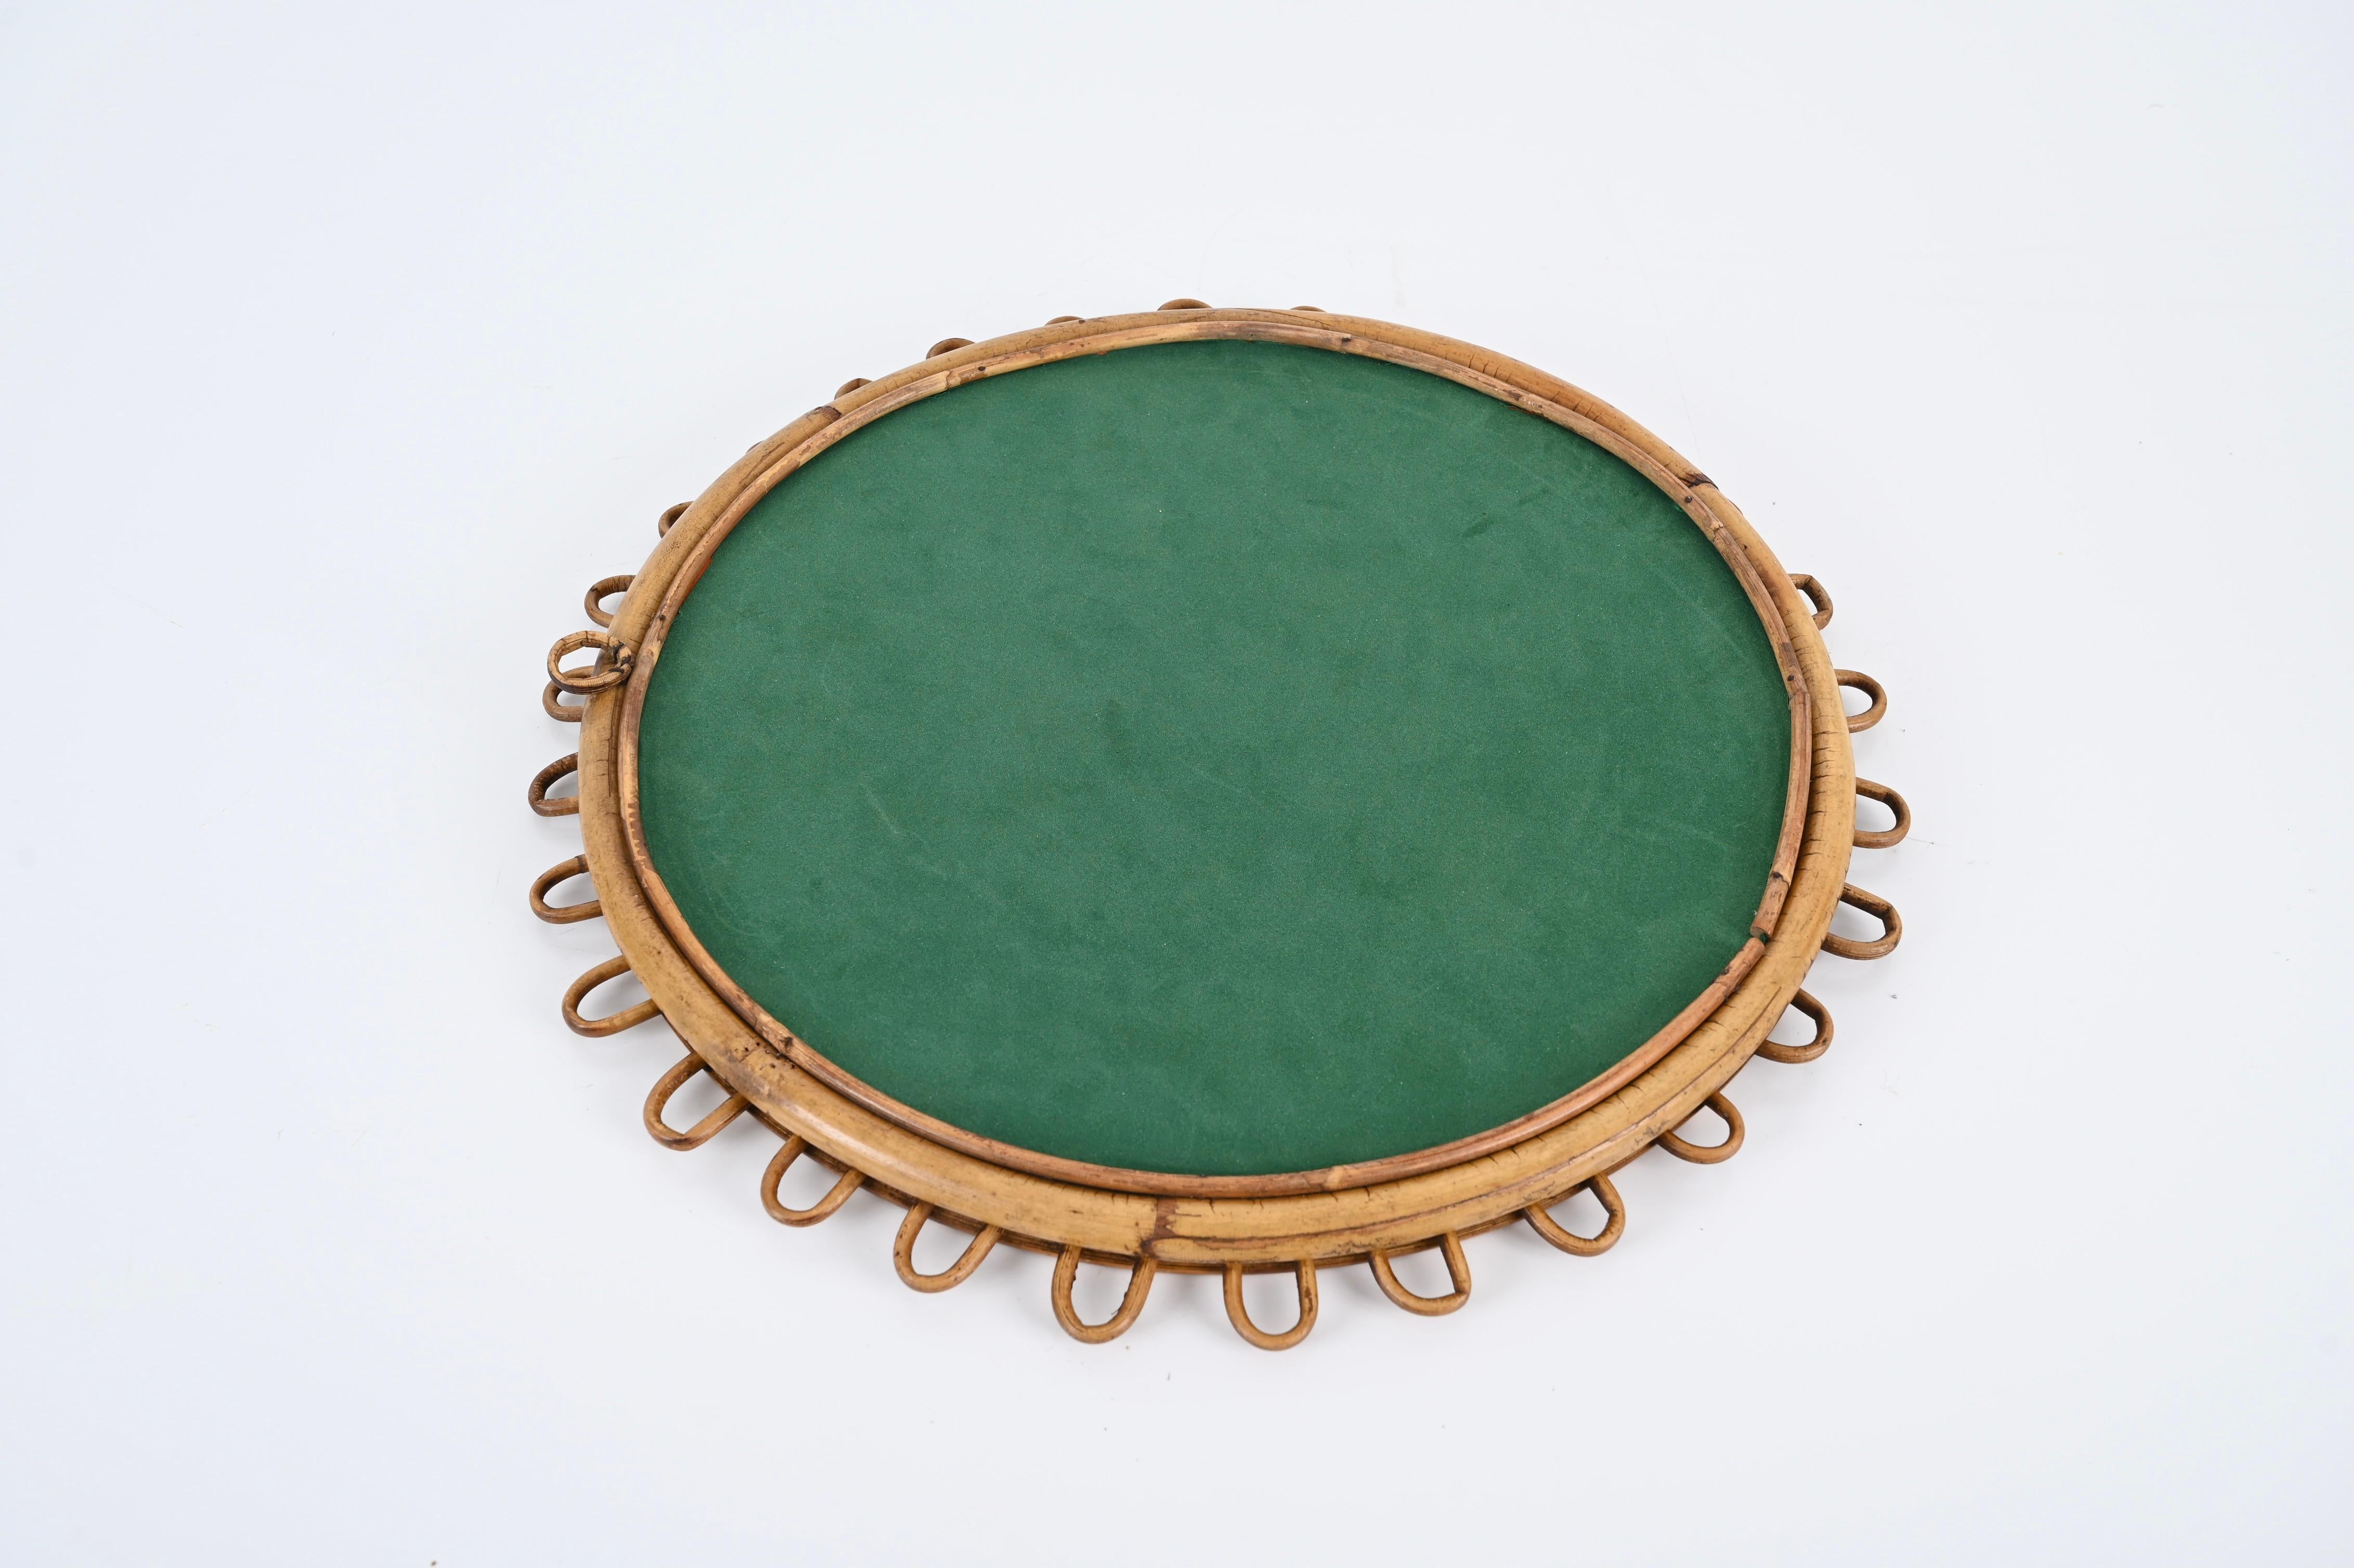 Midcentury French Riviera Rattan and Bamboo Italian Round Mirror, 1960s For Sale 4